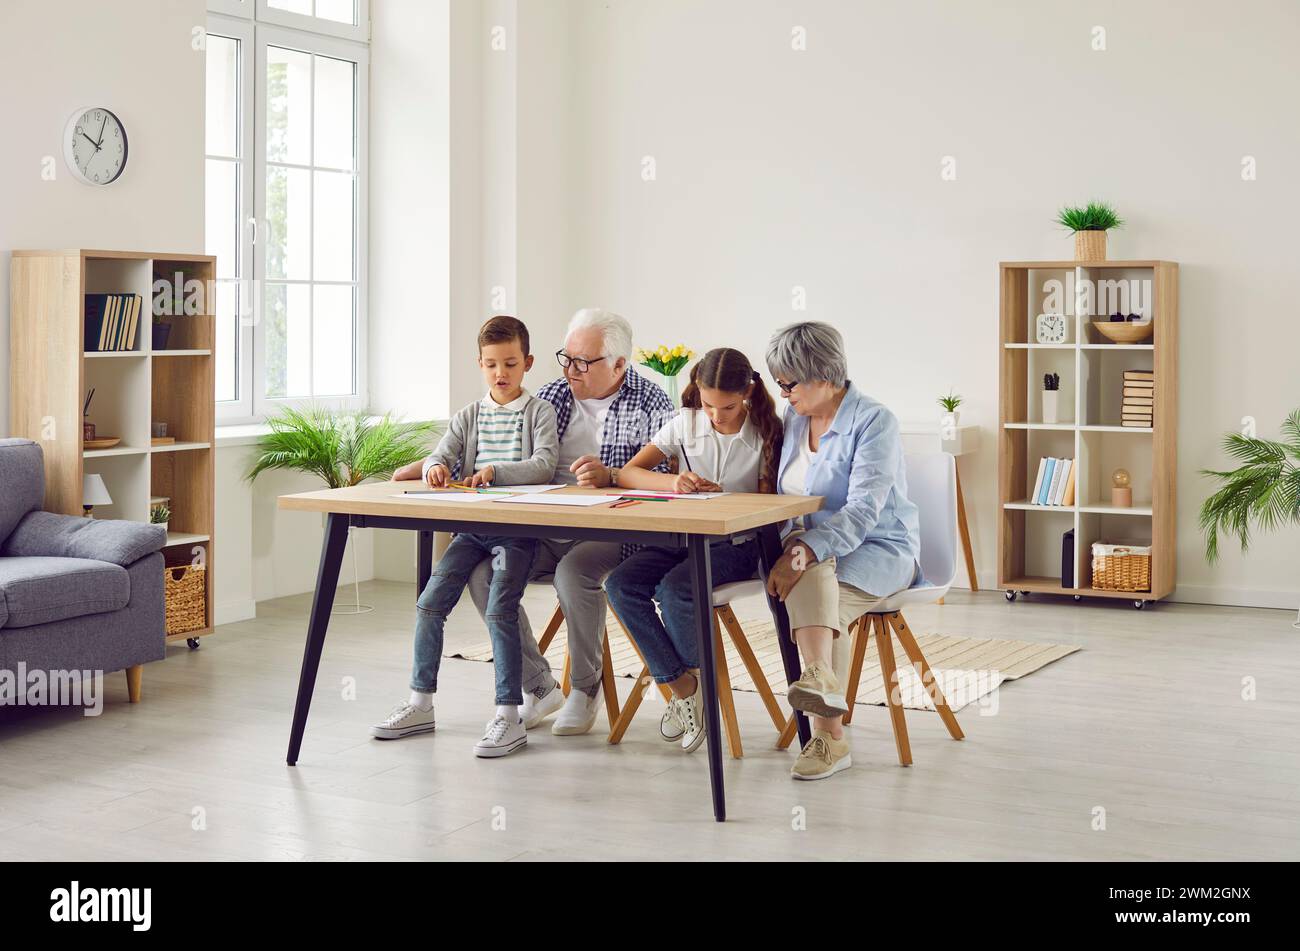 Grandparents and grandchildren spending time together, sitting at table and drawing pictures Stock Photo